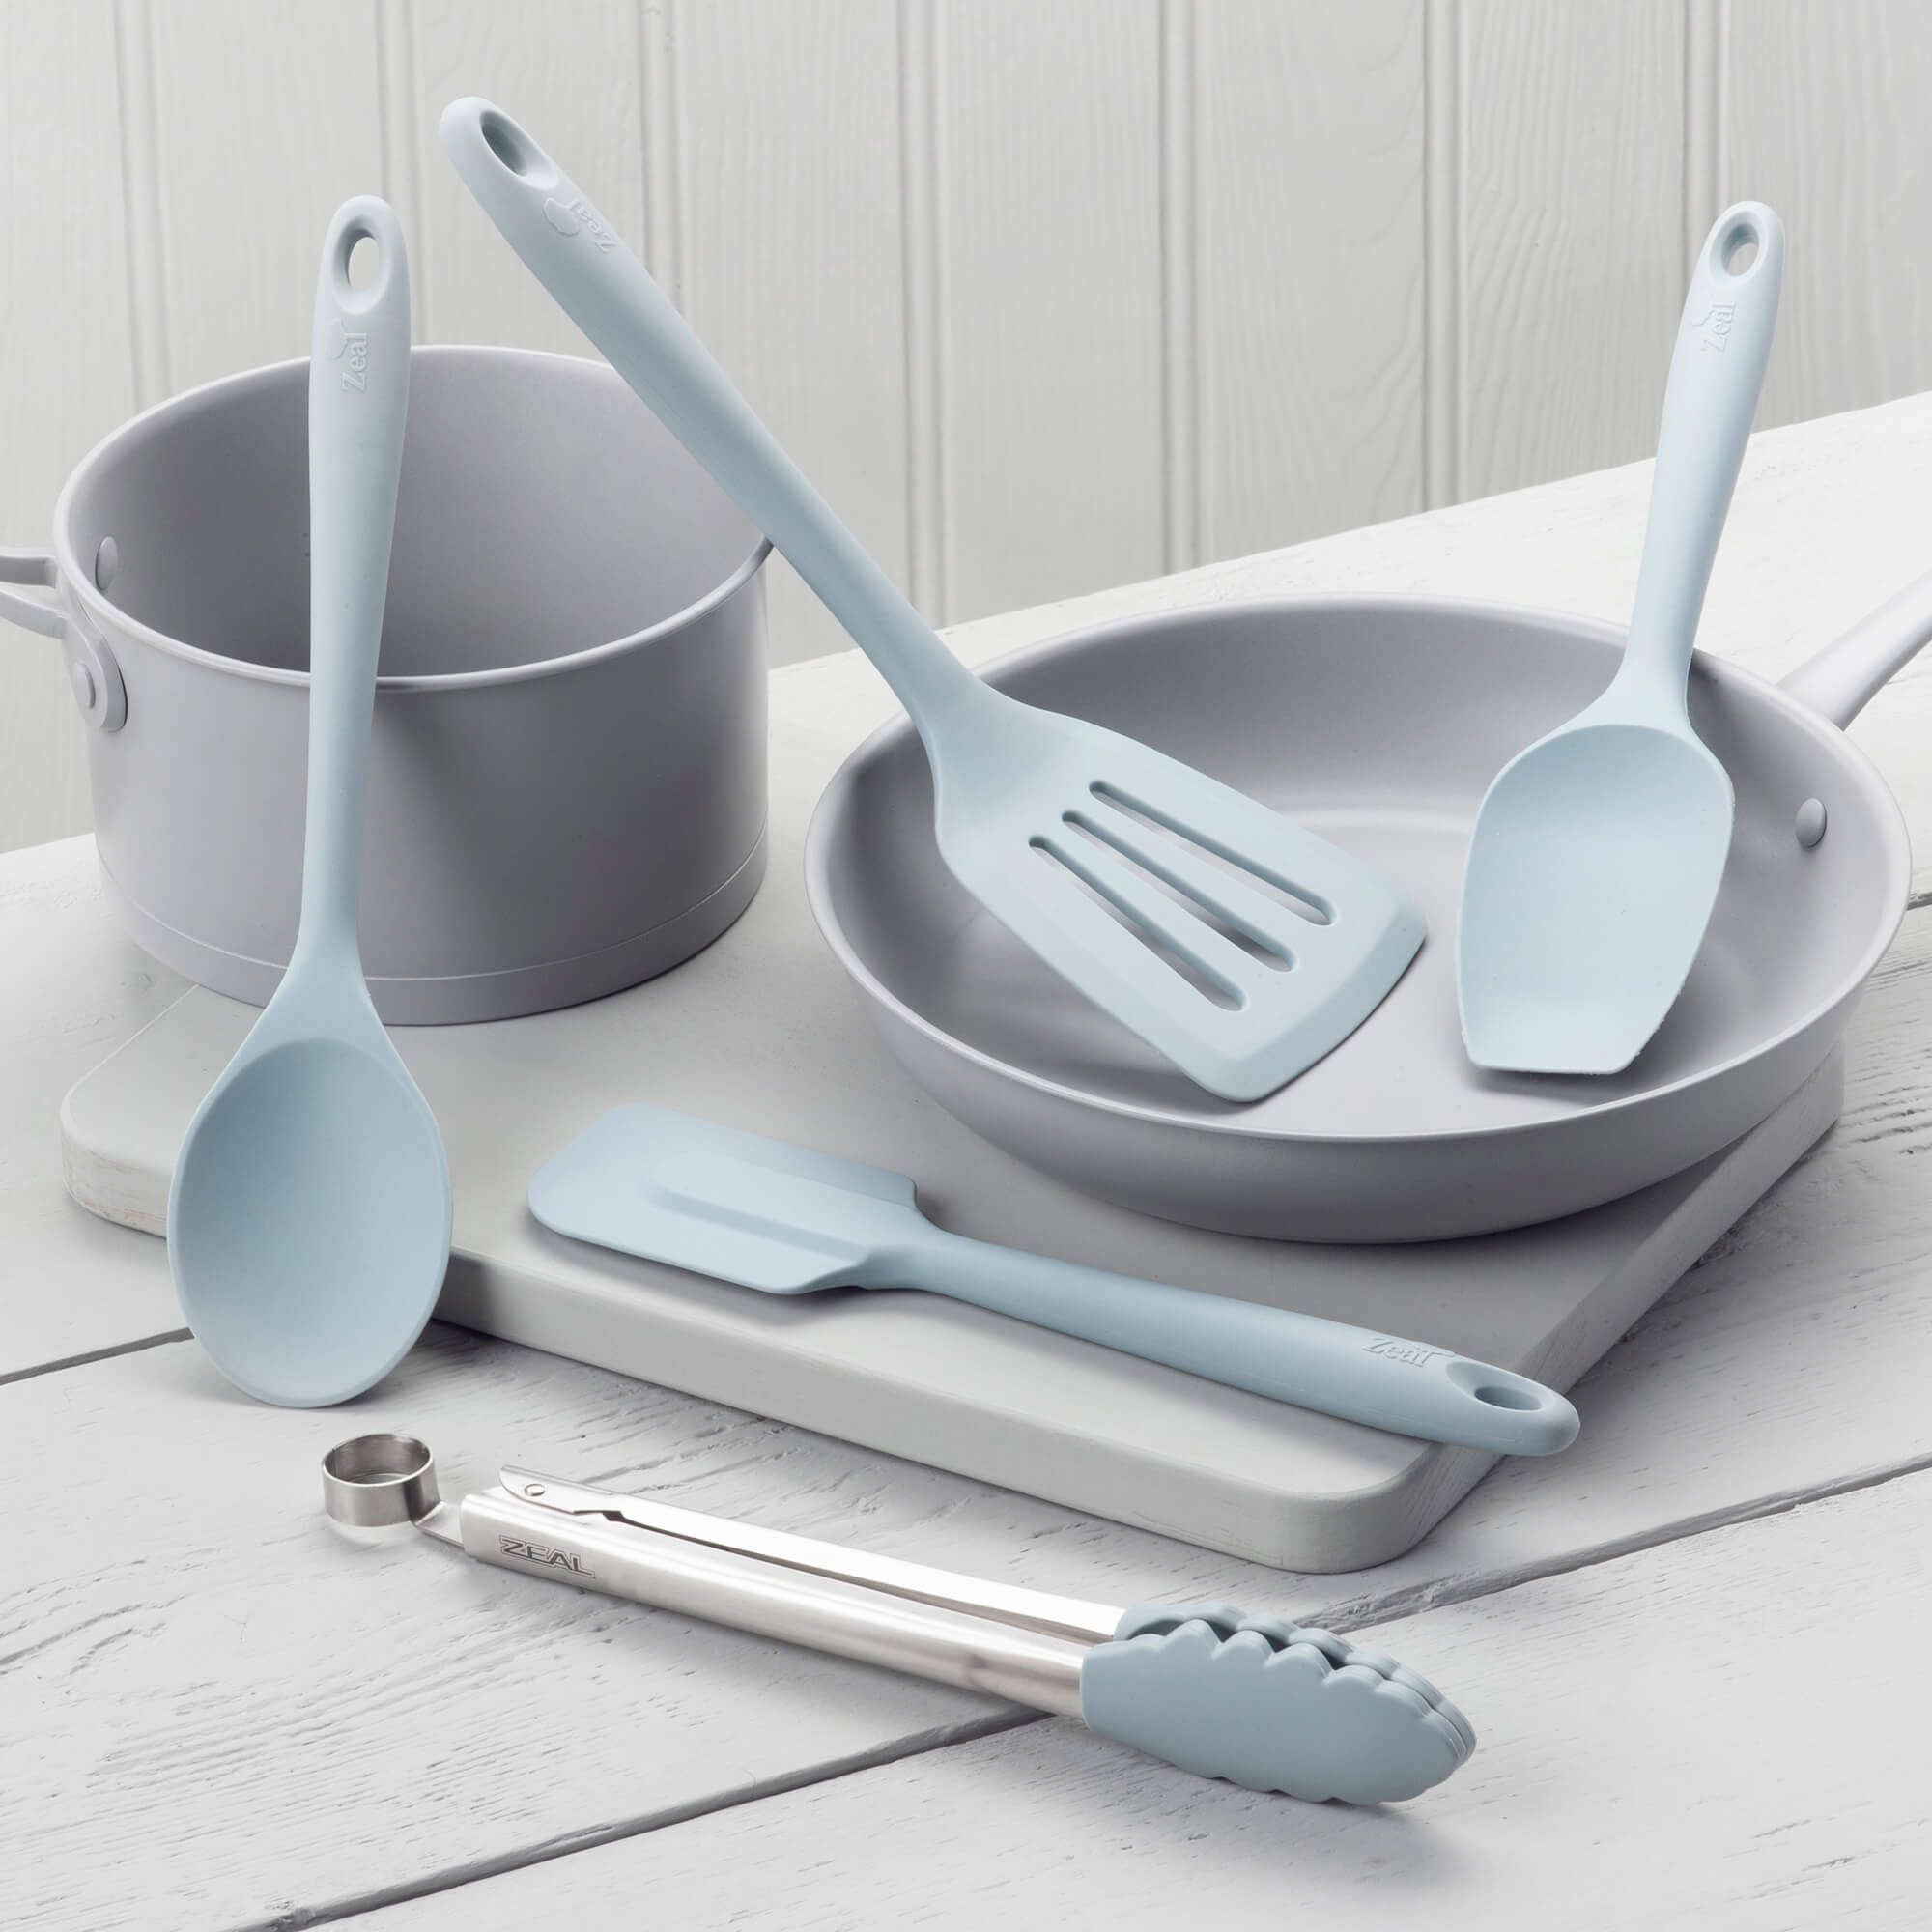 Zeal Kitchen Tongs, Slotted Turner, Spoon, Spatula Spoon & Spatula Set in Duck Egg Blue